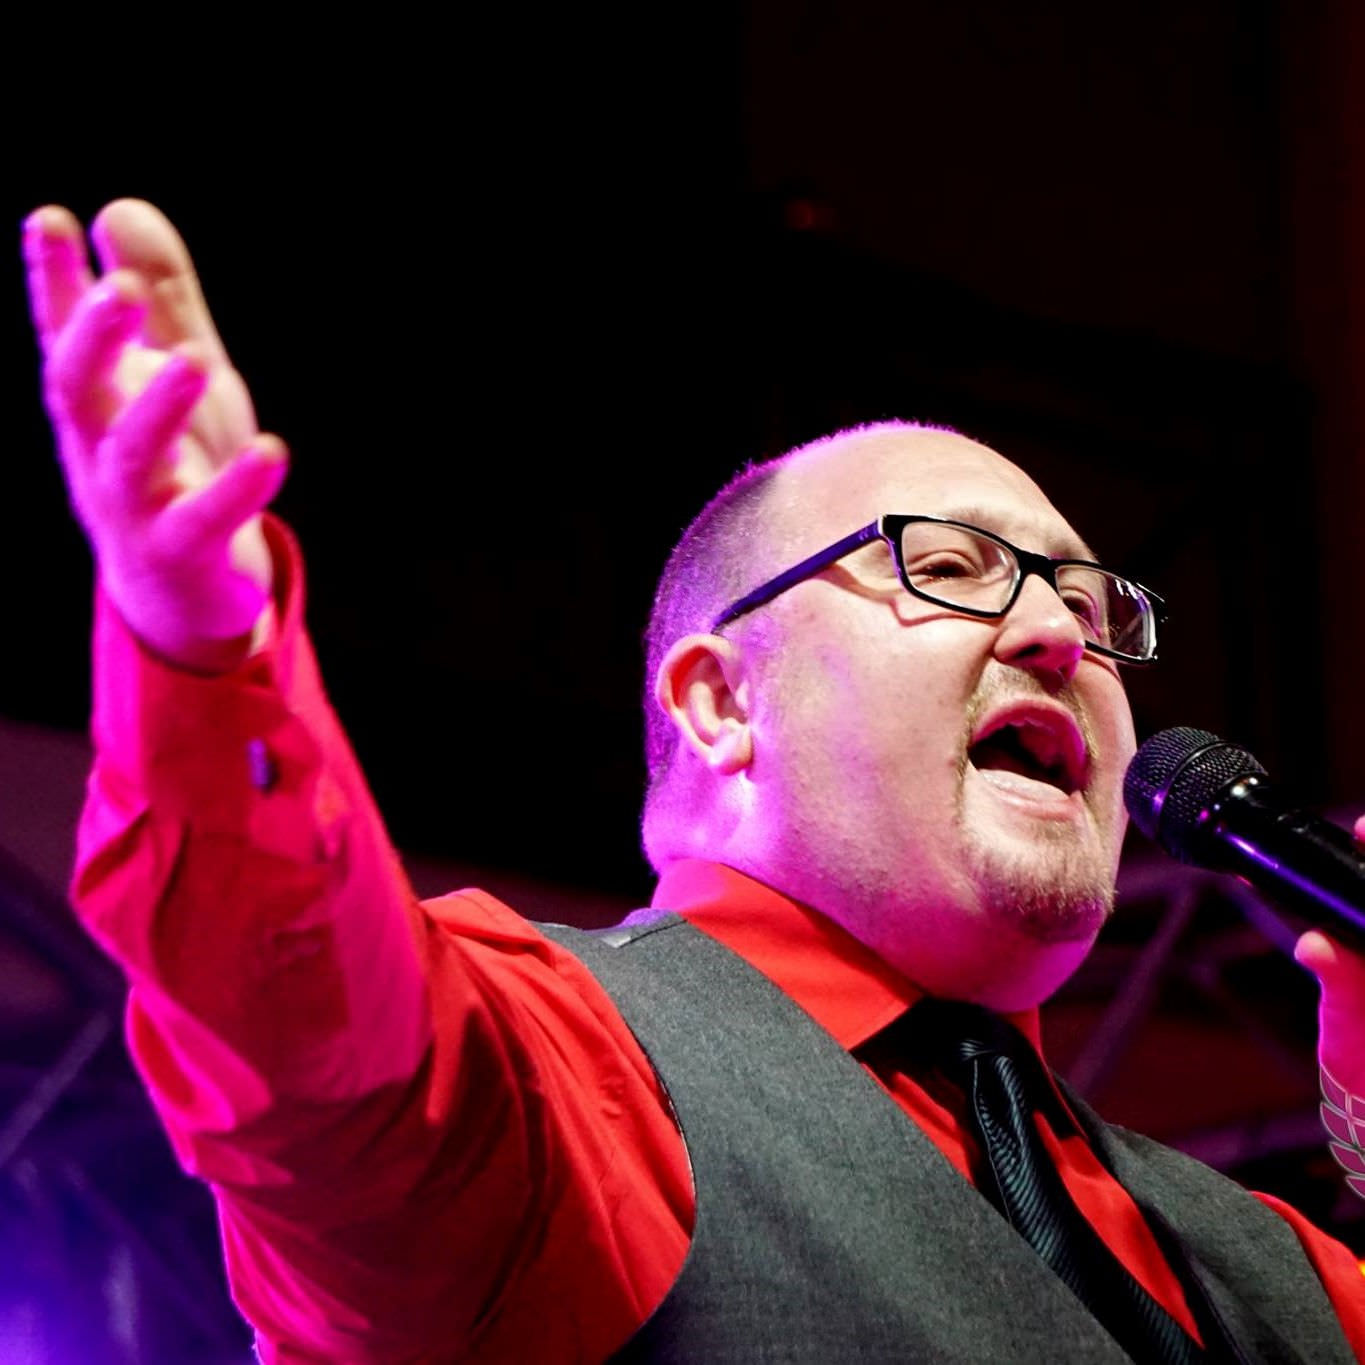 Jon paul cabaret party entertainer wearing red shirt and singing into microphone with right arm outstretched.